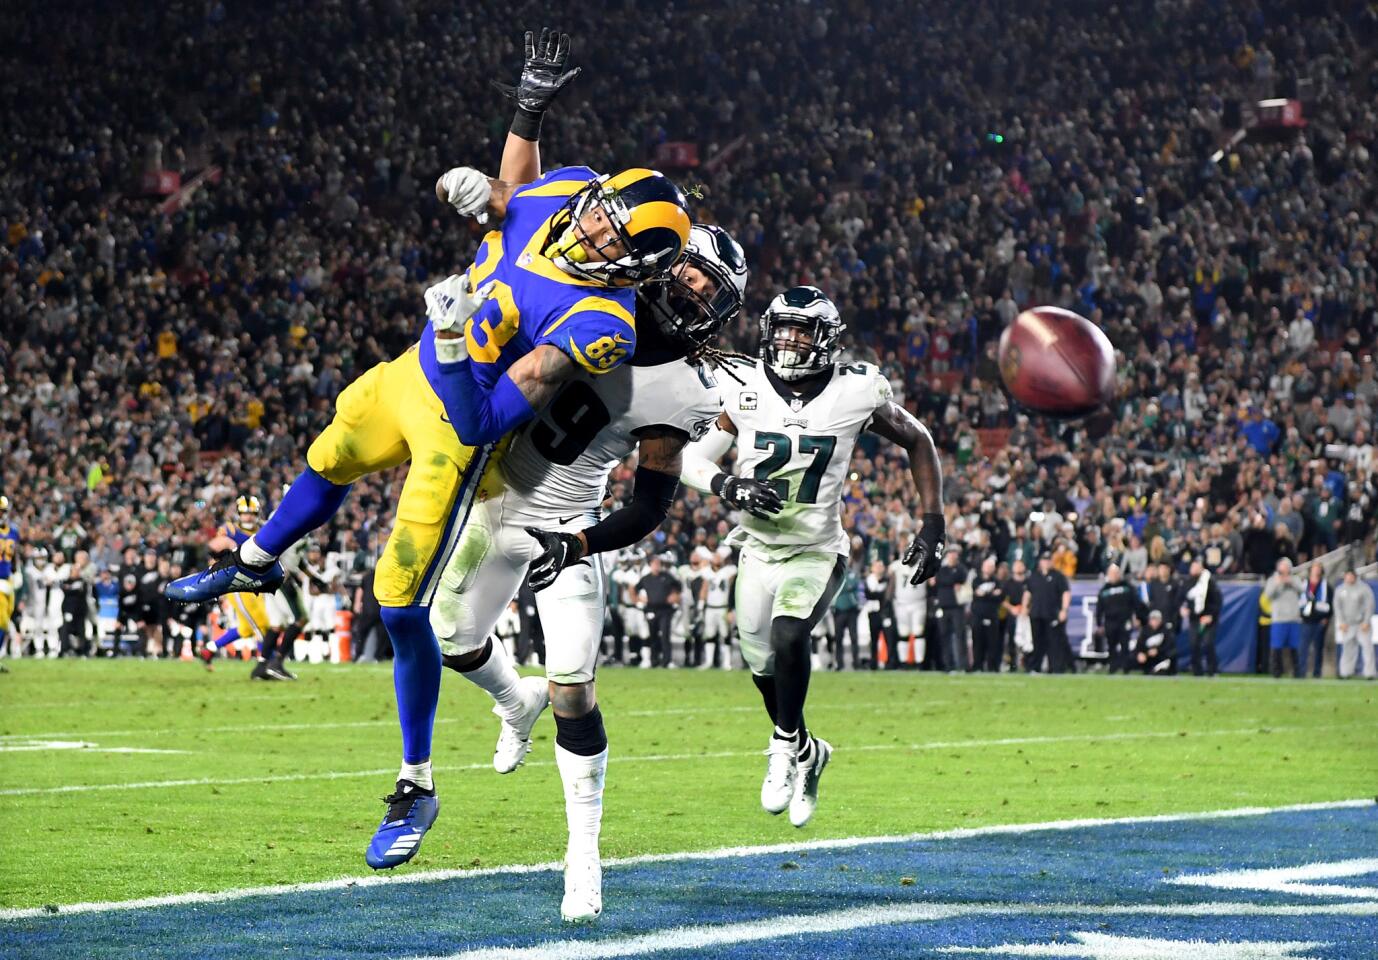 Rams receiver Josh Reynolds can't make the catch on the game's final play.